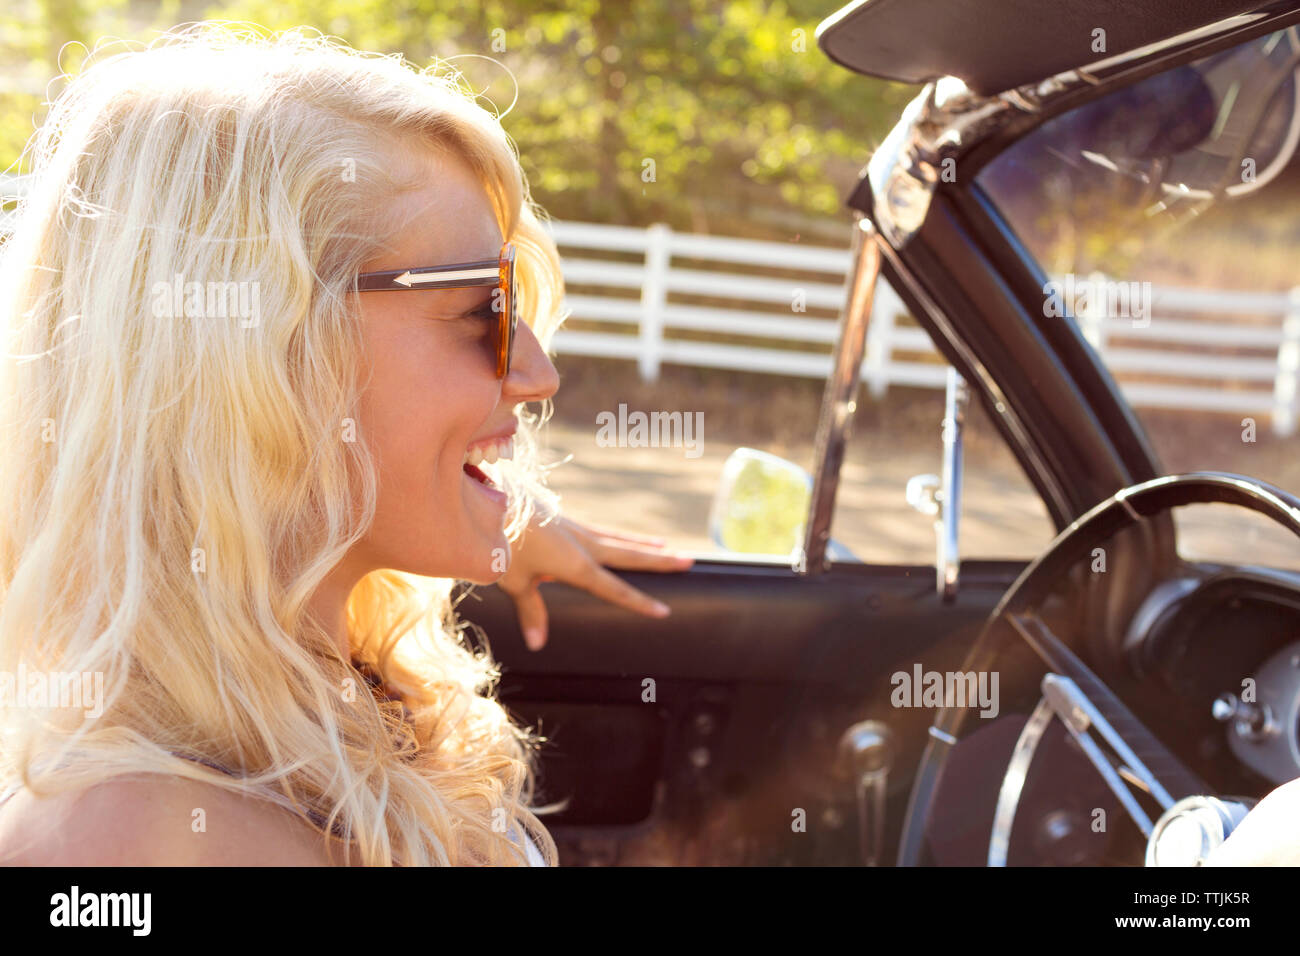 Cheerful woman sitting in convertible car Banque D'Images